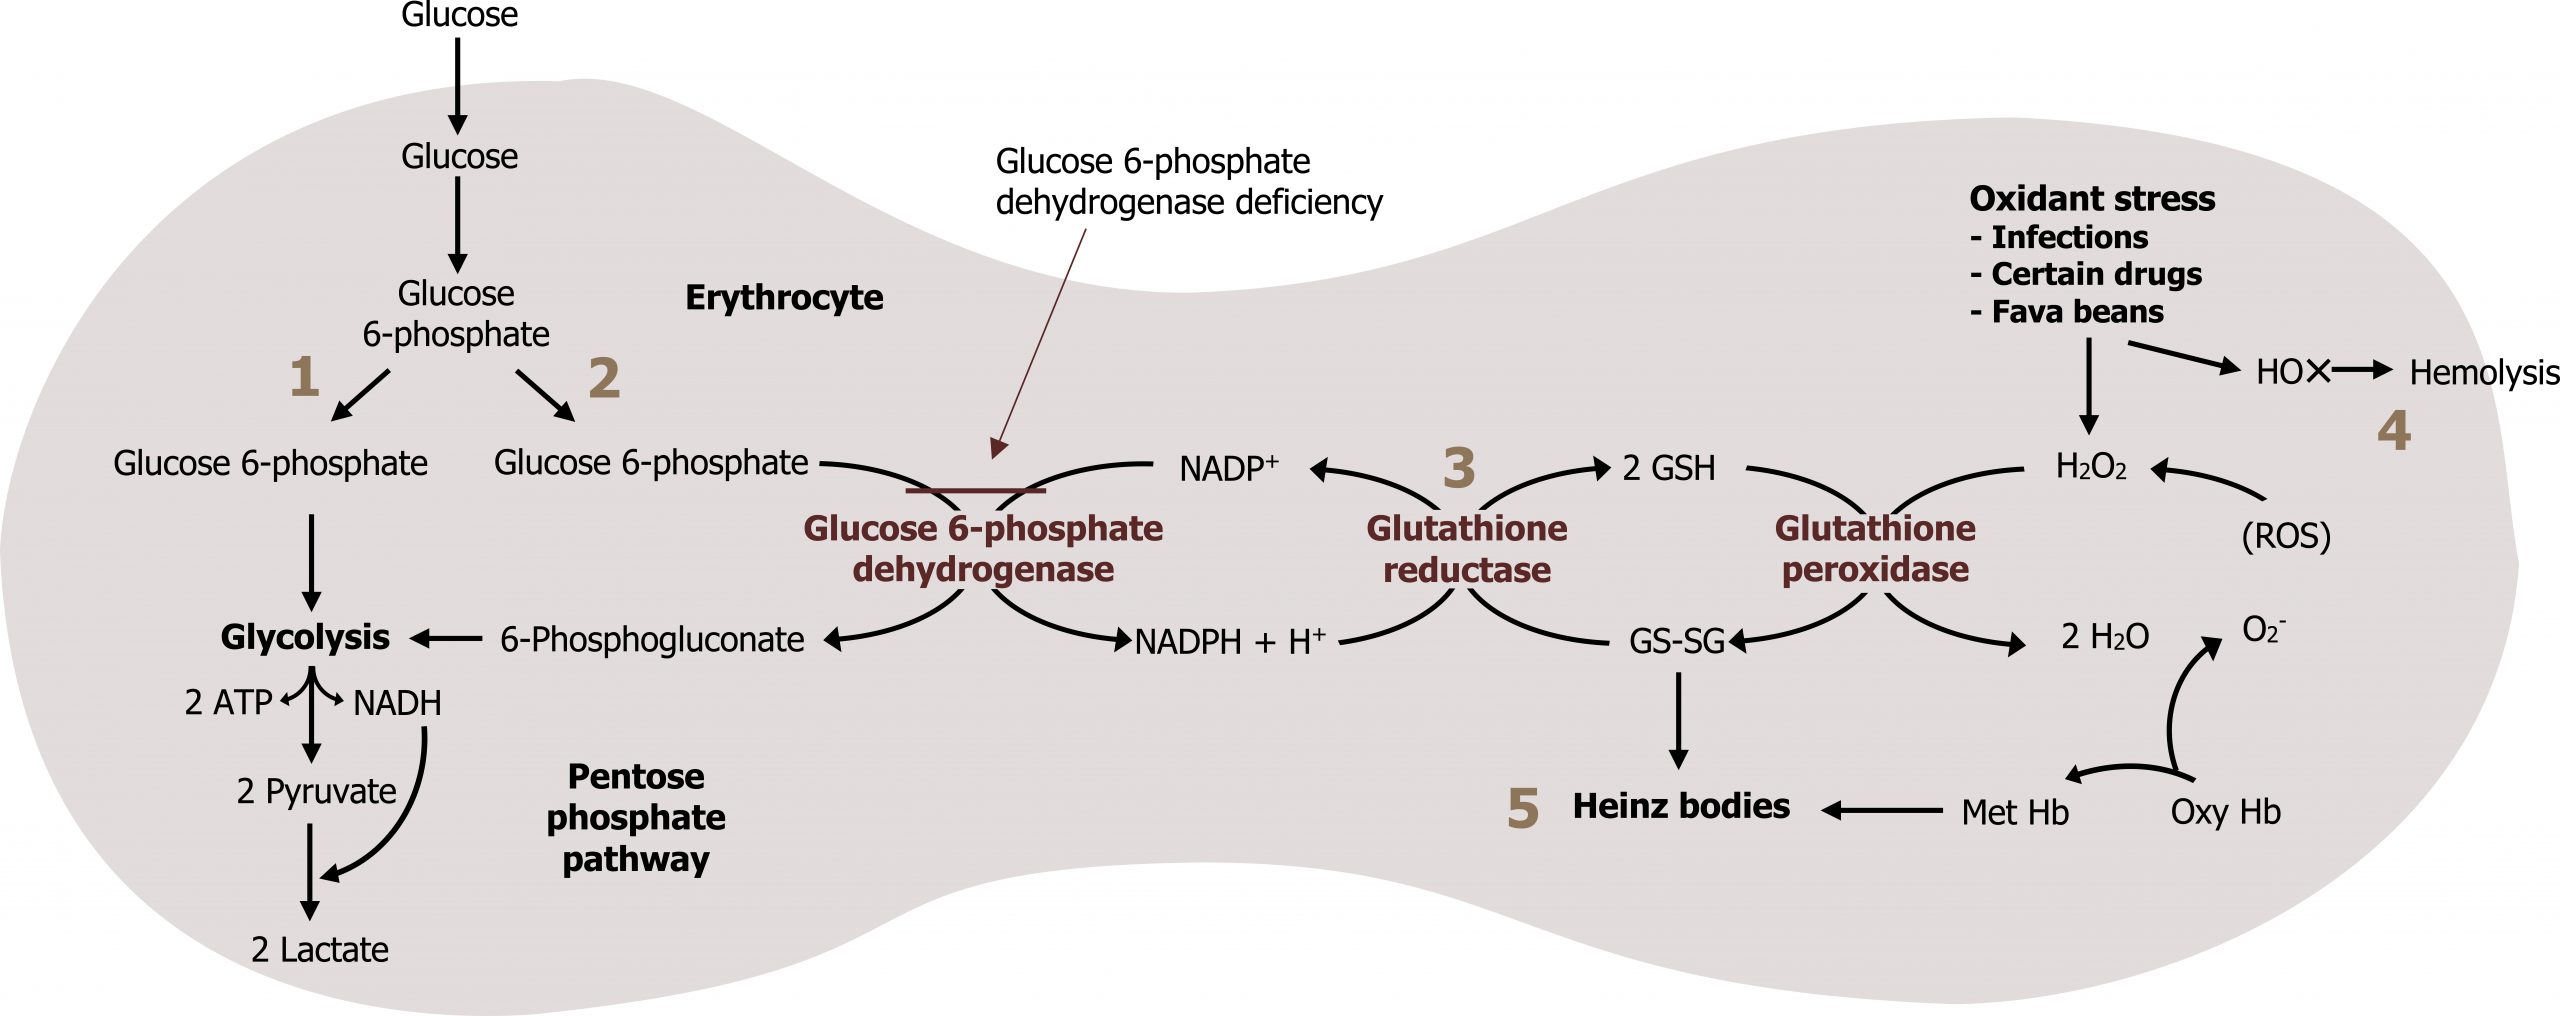 Glucose arrow into an erythrocyte to glucose 6-phosphate. Glucose 6-phosphate arrow glycolysis arrow with loss of 2 ATP and NADH to 2 pyruvate arrow 2 lactate (pentose phosphate pathway). Glucose 6-phosphate arrow with enzyme glucose 6-phosphate dehydrogenase to 6-phosphogluconate arrow to glycolysis. 3 clockwise circular arrows touching the arrow between glucose 6-phosphate to 6-phosphogluconate. NADP+ counterclockwise circular arrow with enzyme glucose 6-phosphate dehydrogenase to NADPH + H+ counterclockwise circular arrow with enzyme glutathione reductase to NADP+. Horizontal line touching arrows with glucose 6-phosphate dehydrogenase labeled glucose 6-phosphate dehydrogenase deficiency. 2 GSH clockwise circular arrow with enzyme glutathione reductase to GS-SG clockwise circular arrow with enzyme glutathione peroxidase to 2 GSH. GS-SG arrow Heinz bodies. ROS circular arrow to H2O2 counterclockwise circular arrow with enzyme glutathione peroxidase to 2 H2O. Oxidant stress: infection, certain drugs, fava beans arrows to H2O2 and HO radical. HO radical arrow hemolysis. Below circular arrow Oxy Hb arrows to O2- and MetHb. MetHb arrow Heinz bodies